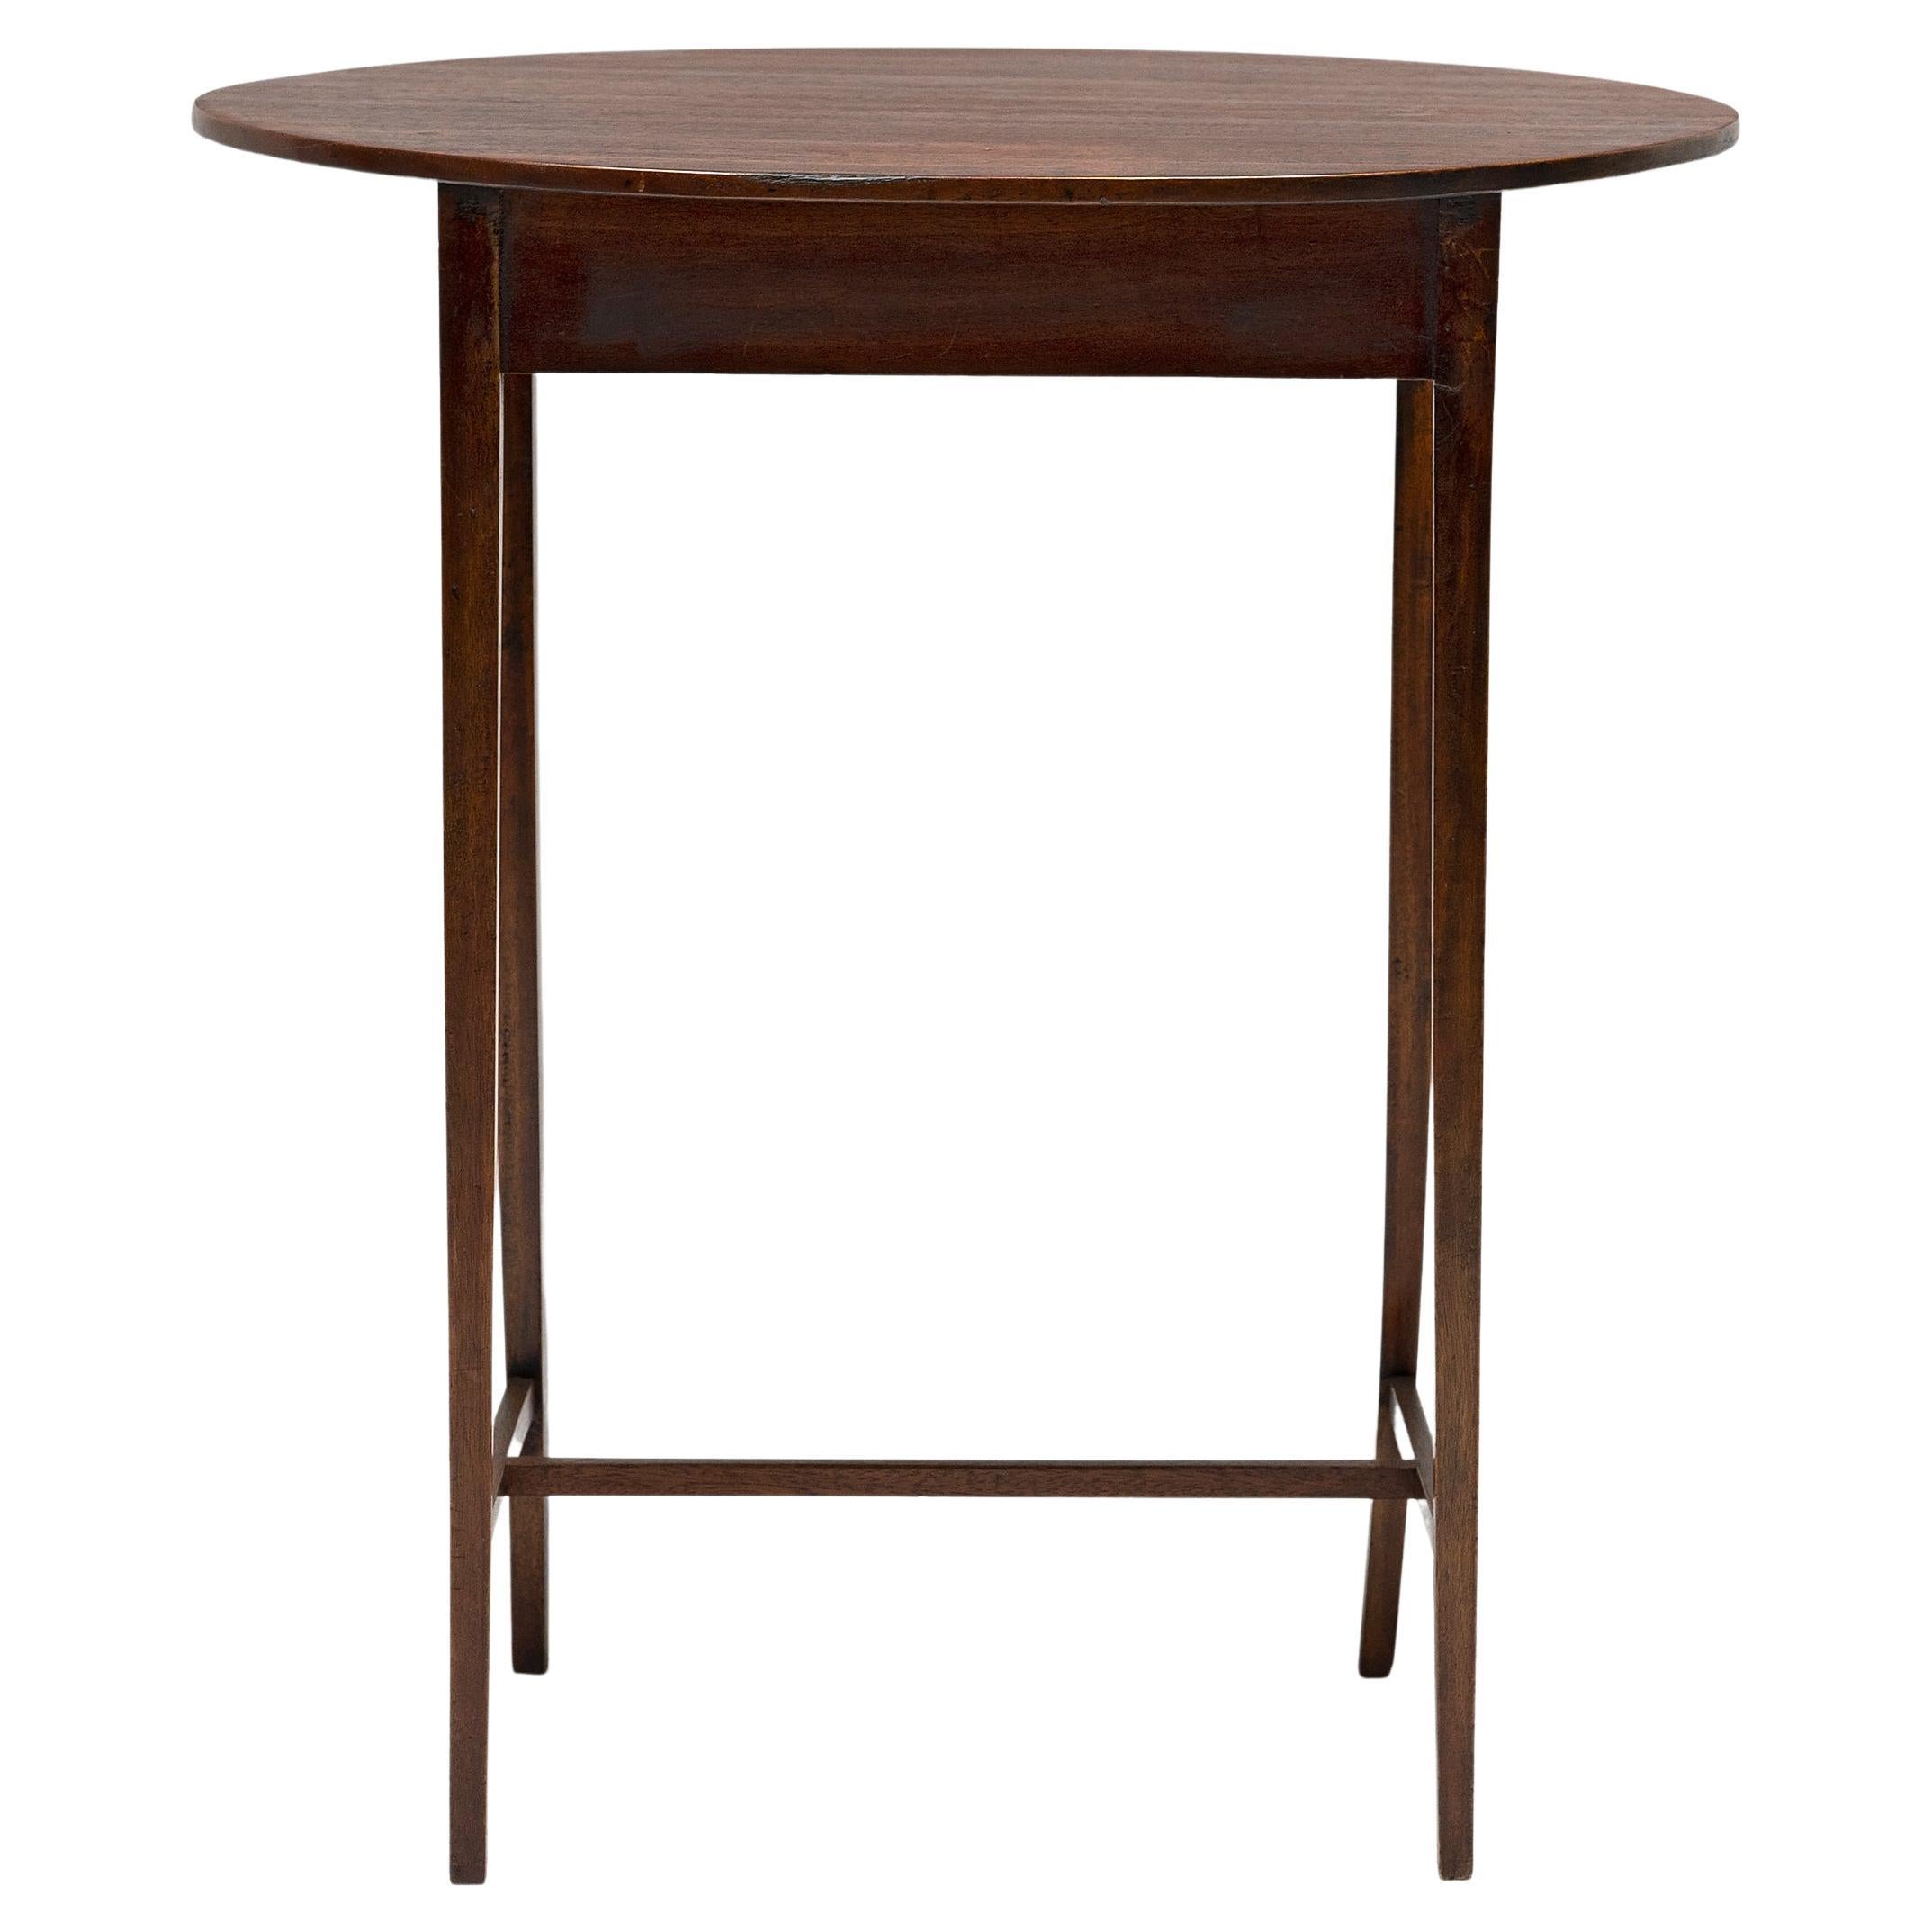 English Oval Side Table